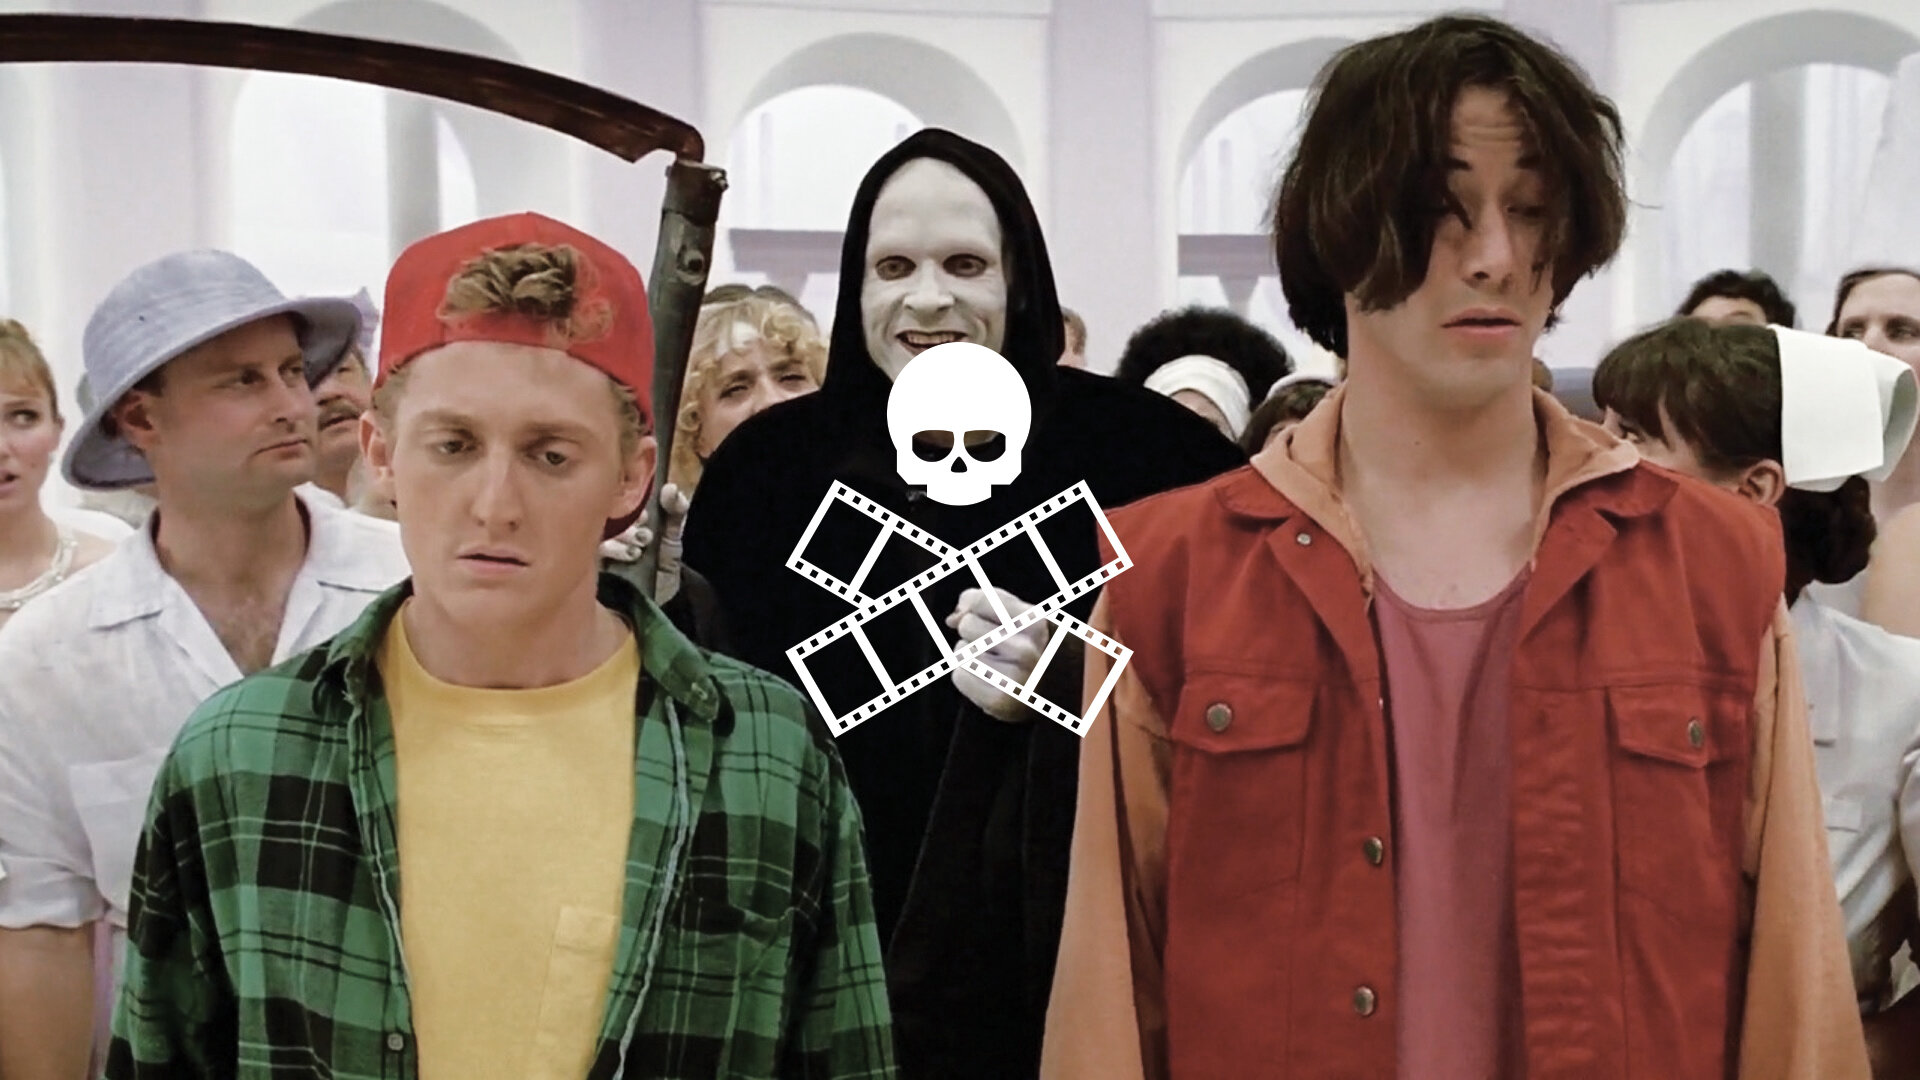 177. Bill & Ted's Bogus Journey